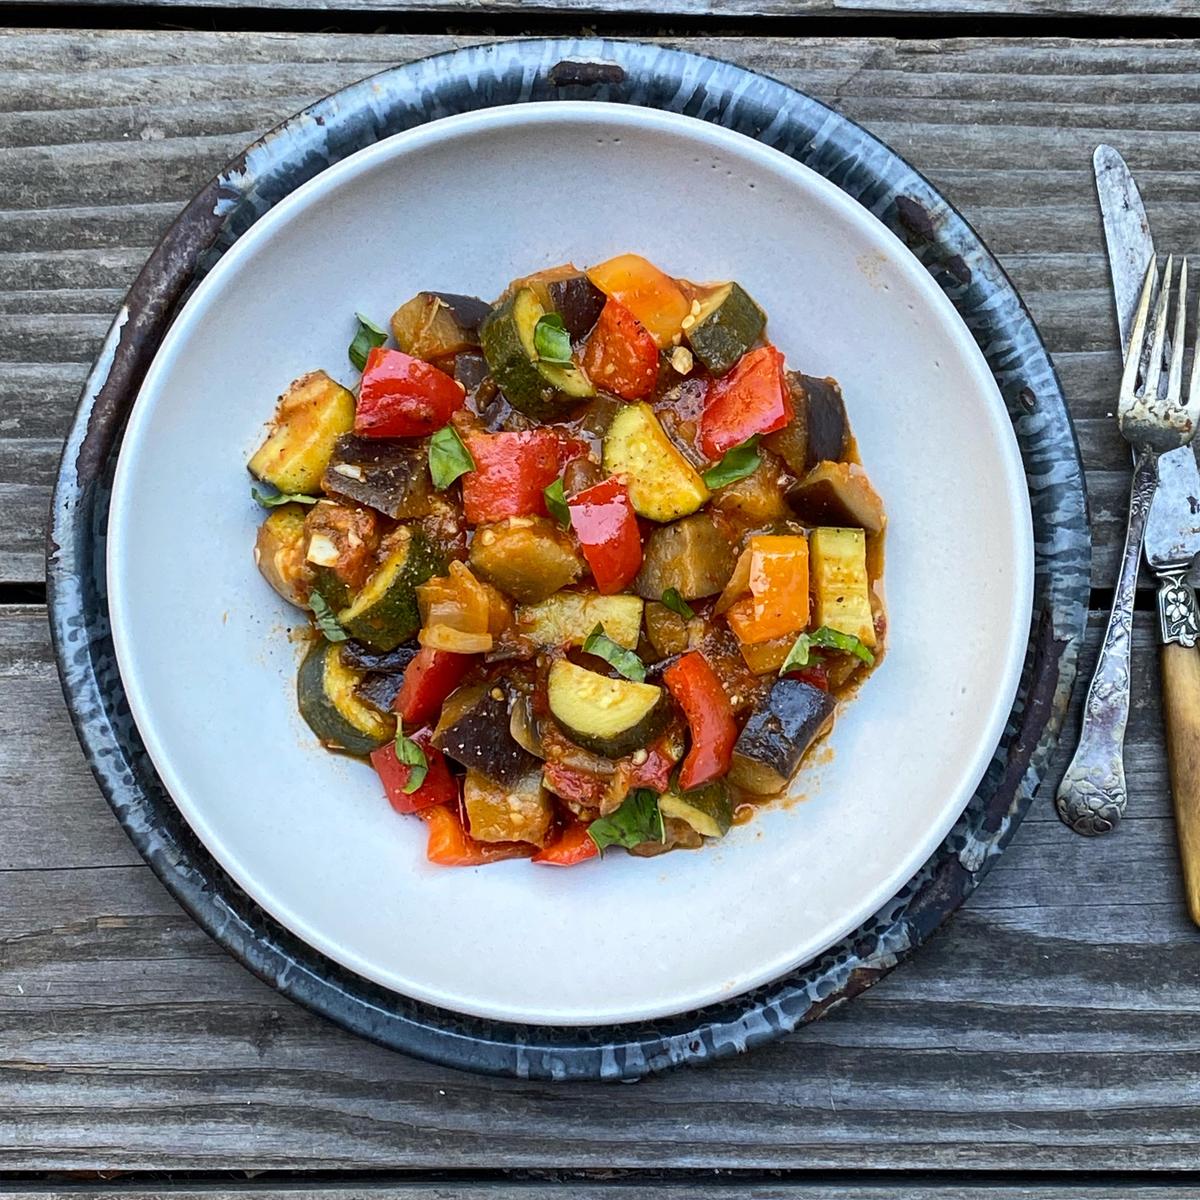 This ratatouille is bright and fresh, neither muddled nor overly sauced, and a perfectly light, summery complement to any meal. (Lynda Balslev for Tastefood)